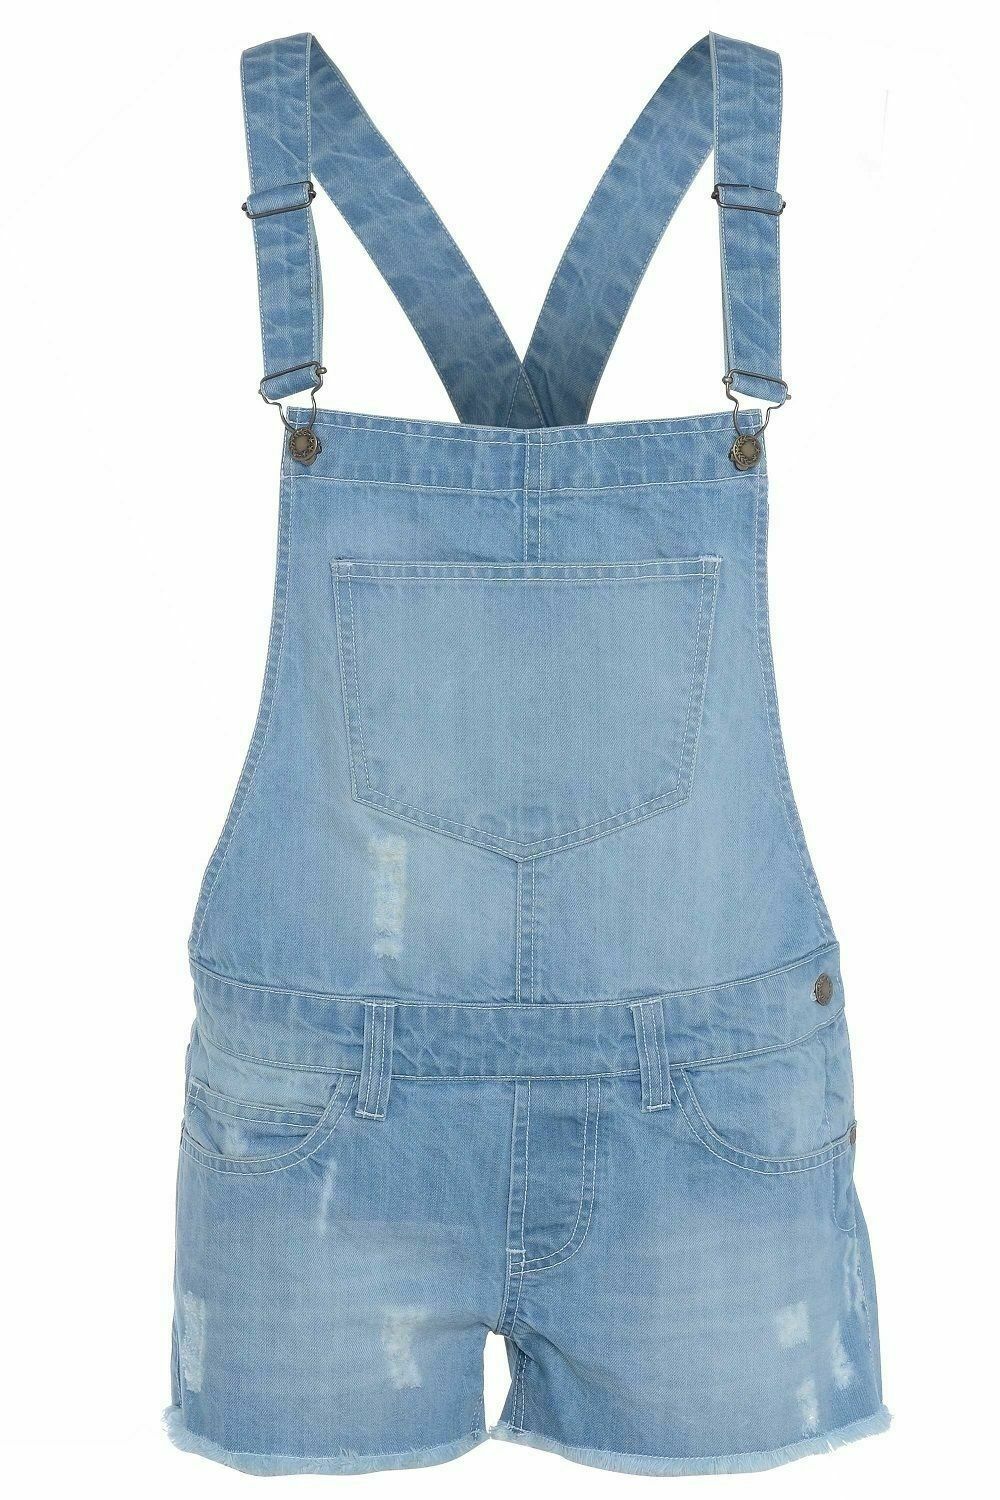 Ladies Light Wash Short Dungaree's. Pockets At The Front And Back. Sizes 8-20. The Straps Are Adjustable. Perfect For Summer Wear